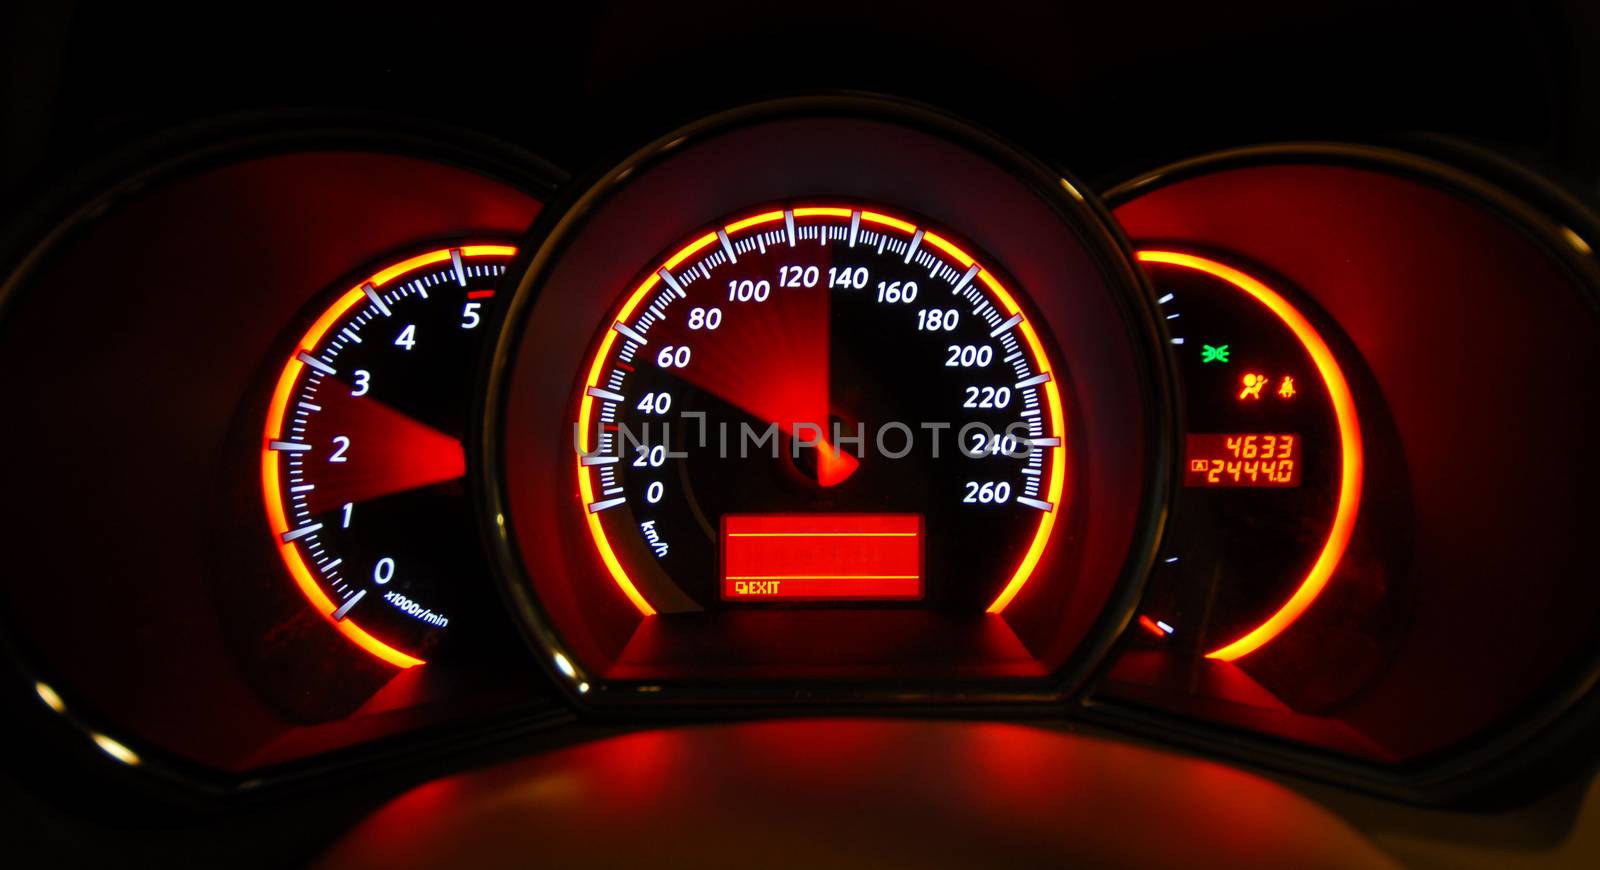 A shot of the car dashboard glowing while stationary